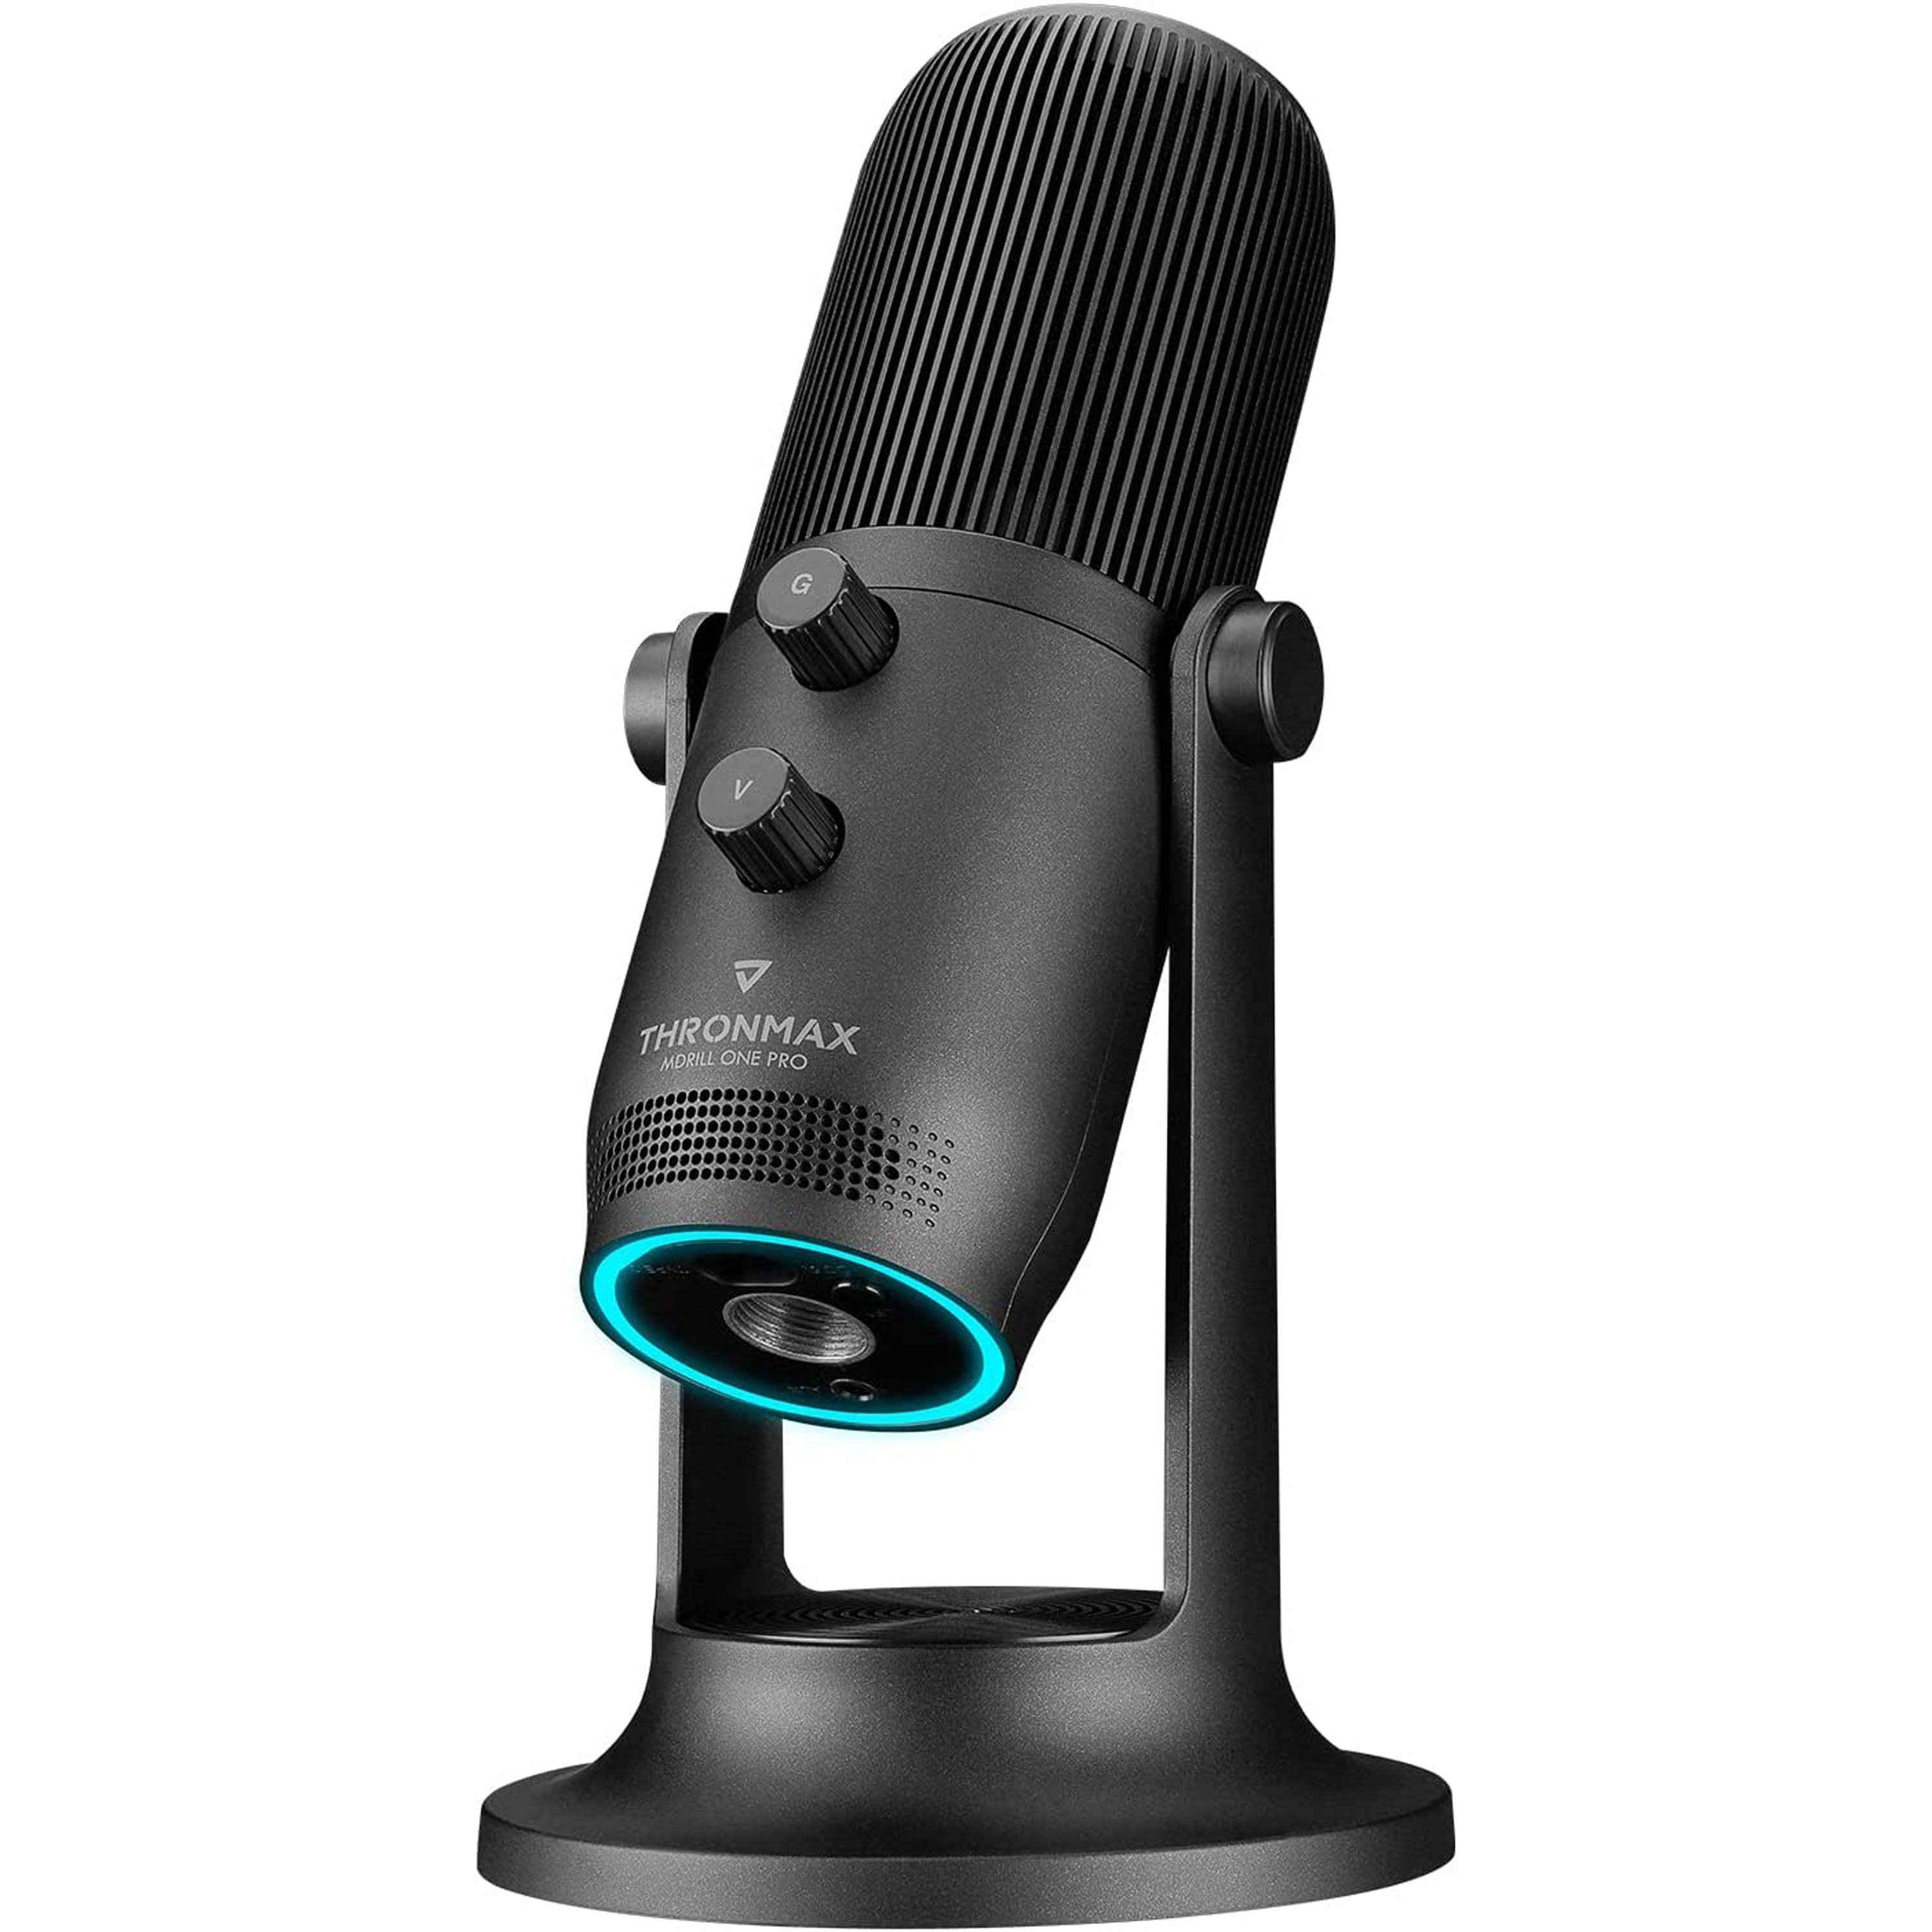 Thronmax MDrill One Pro USB Microphone - Black